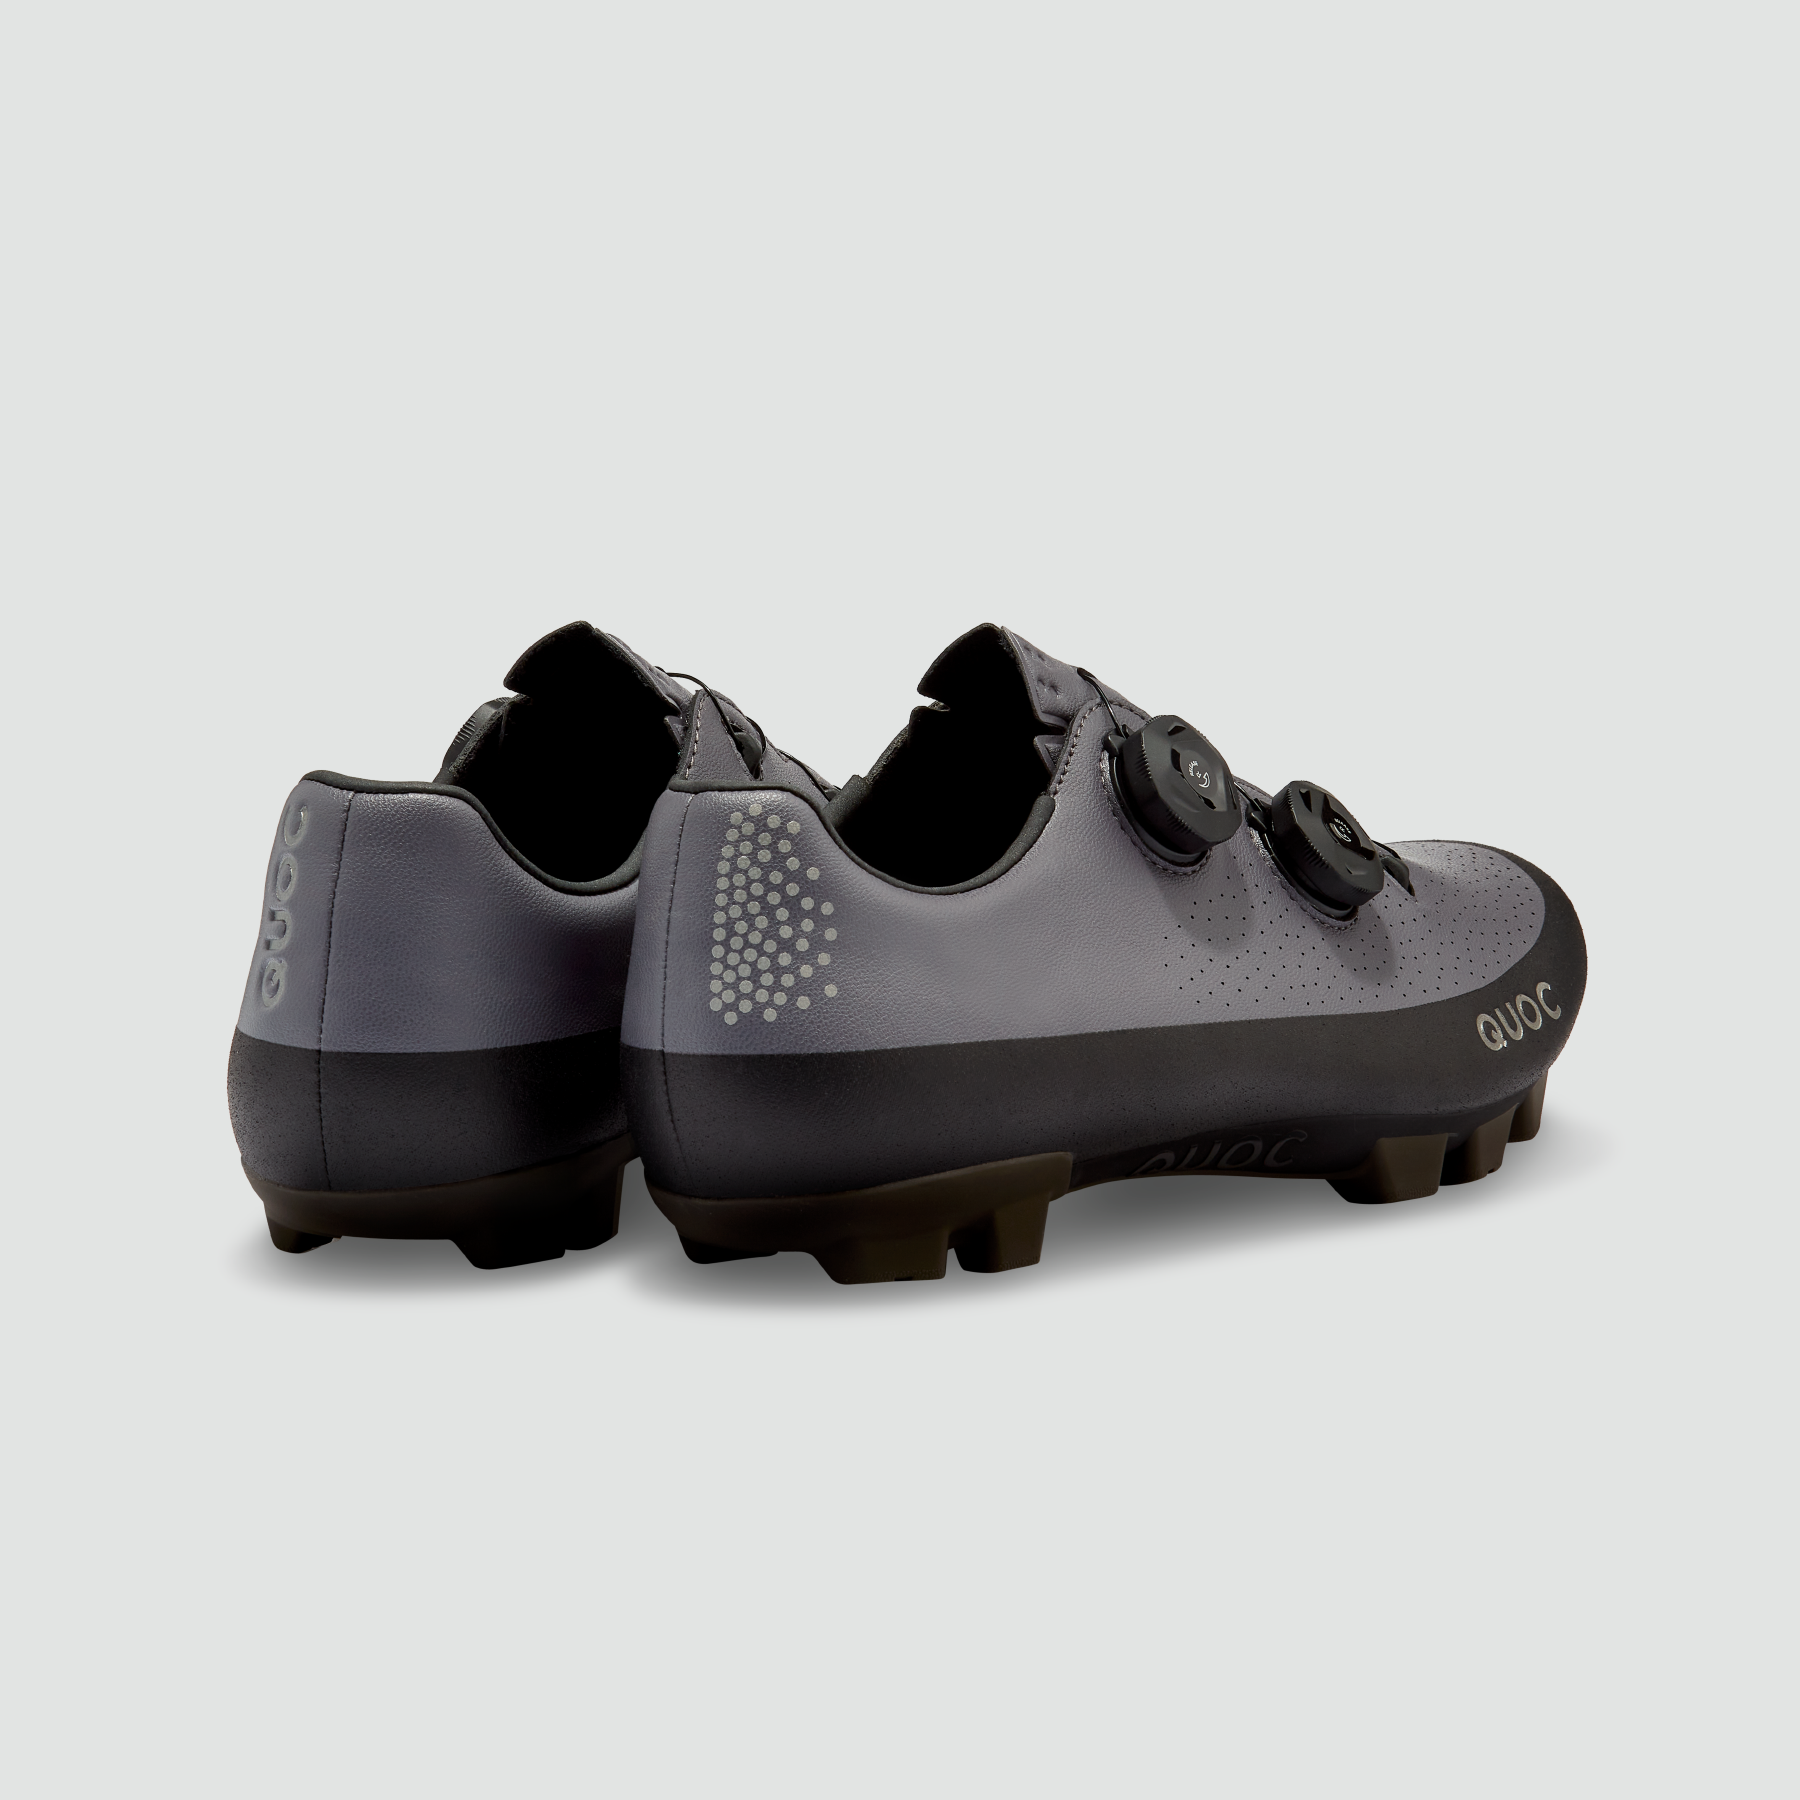 GT XC Shoes - Charcoal